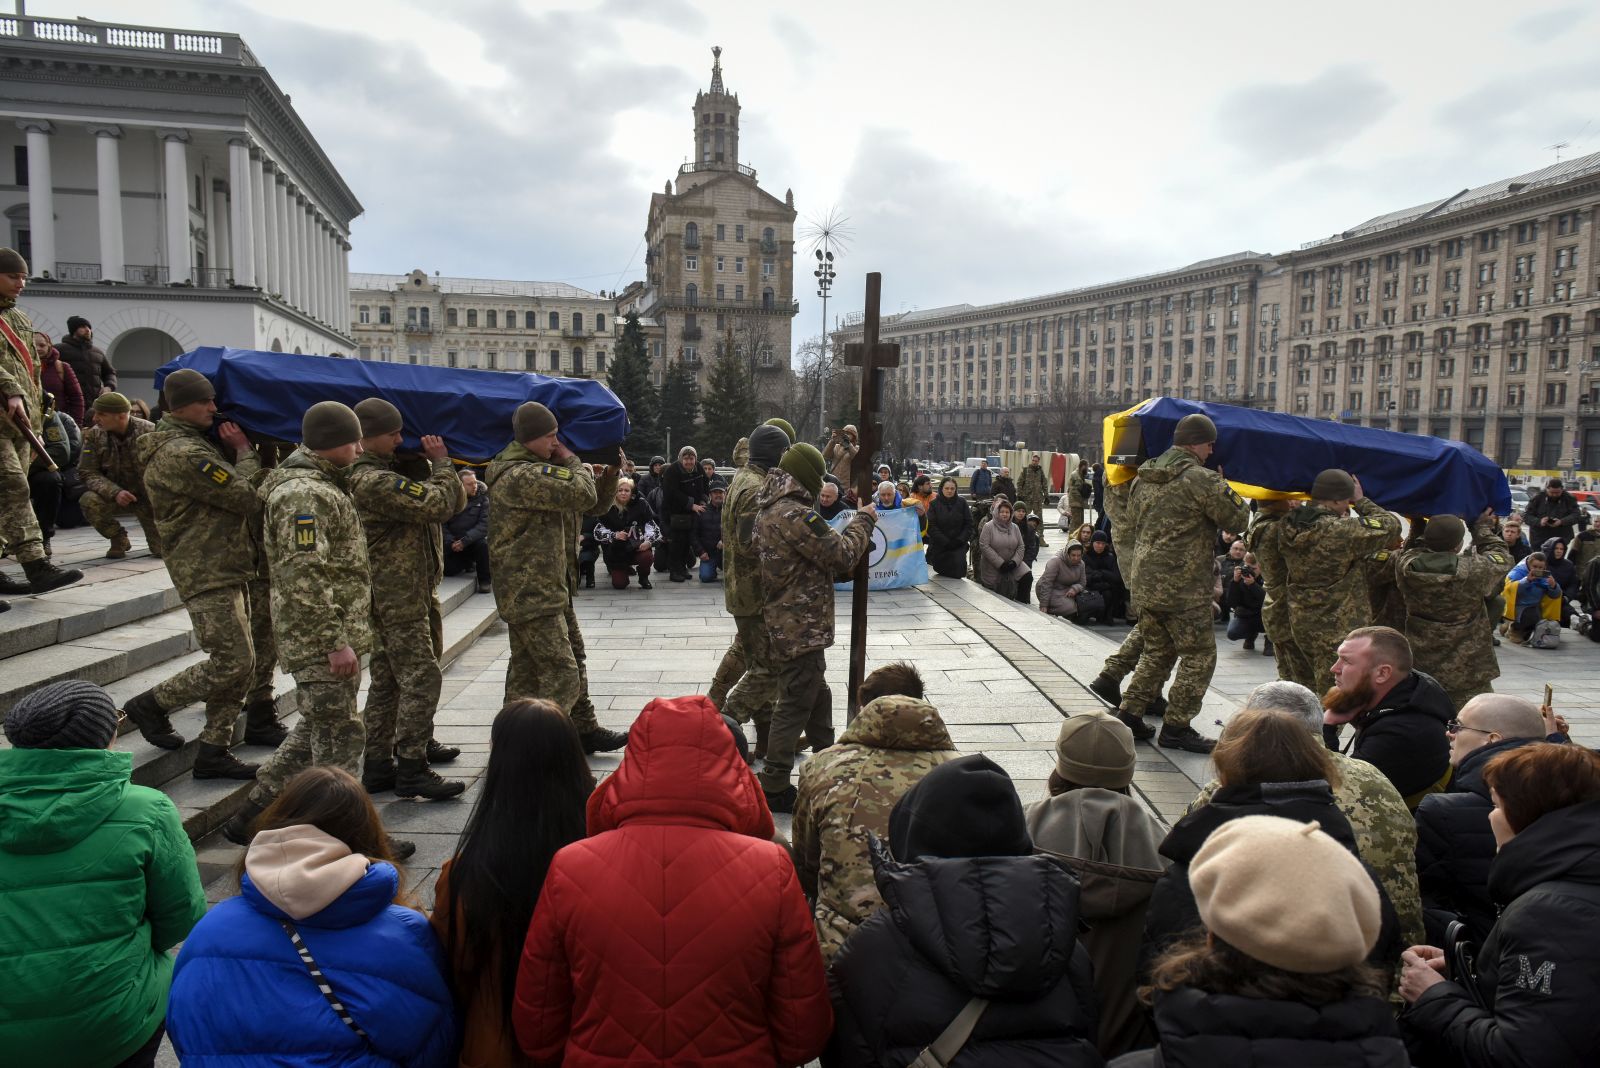 epa10507596 Honor guard carry coffins at memorial service for four Ukrainian fighters at Maidan Nezhalezhnosti Square in Kyiv, Ukraine, 07 March 2023 amid the Russian invasion. Four Ukrainian fighters of the sabotage group Bratstvo (Brotherhood), Yuriy Horovets, Maksym Mykhaylov, Taras Karpyuk, and Bohdan Lyagov died on the territory of Russia while performing a combat mission on December 25, 2022. On 26 December, Russia's Federal Security Service FSB announced they had killed four Ukrainians of a sabotage group in the Bryansk Oblast. Their bodies were returned to Ukraine on 22 February 2023. Russian troops entered Ukrainian territory on 24 February 2022, starting a conflict that has provoked destruction and a humanitarian crisis.  EPA/OLEG PETRASYUK